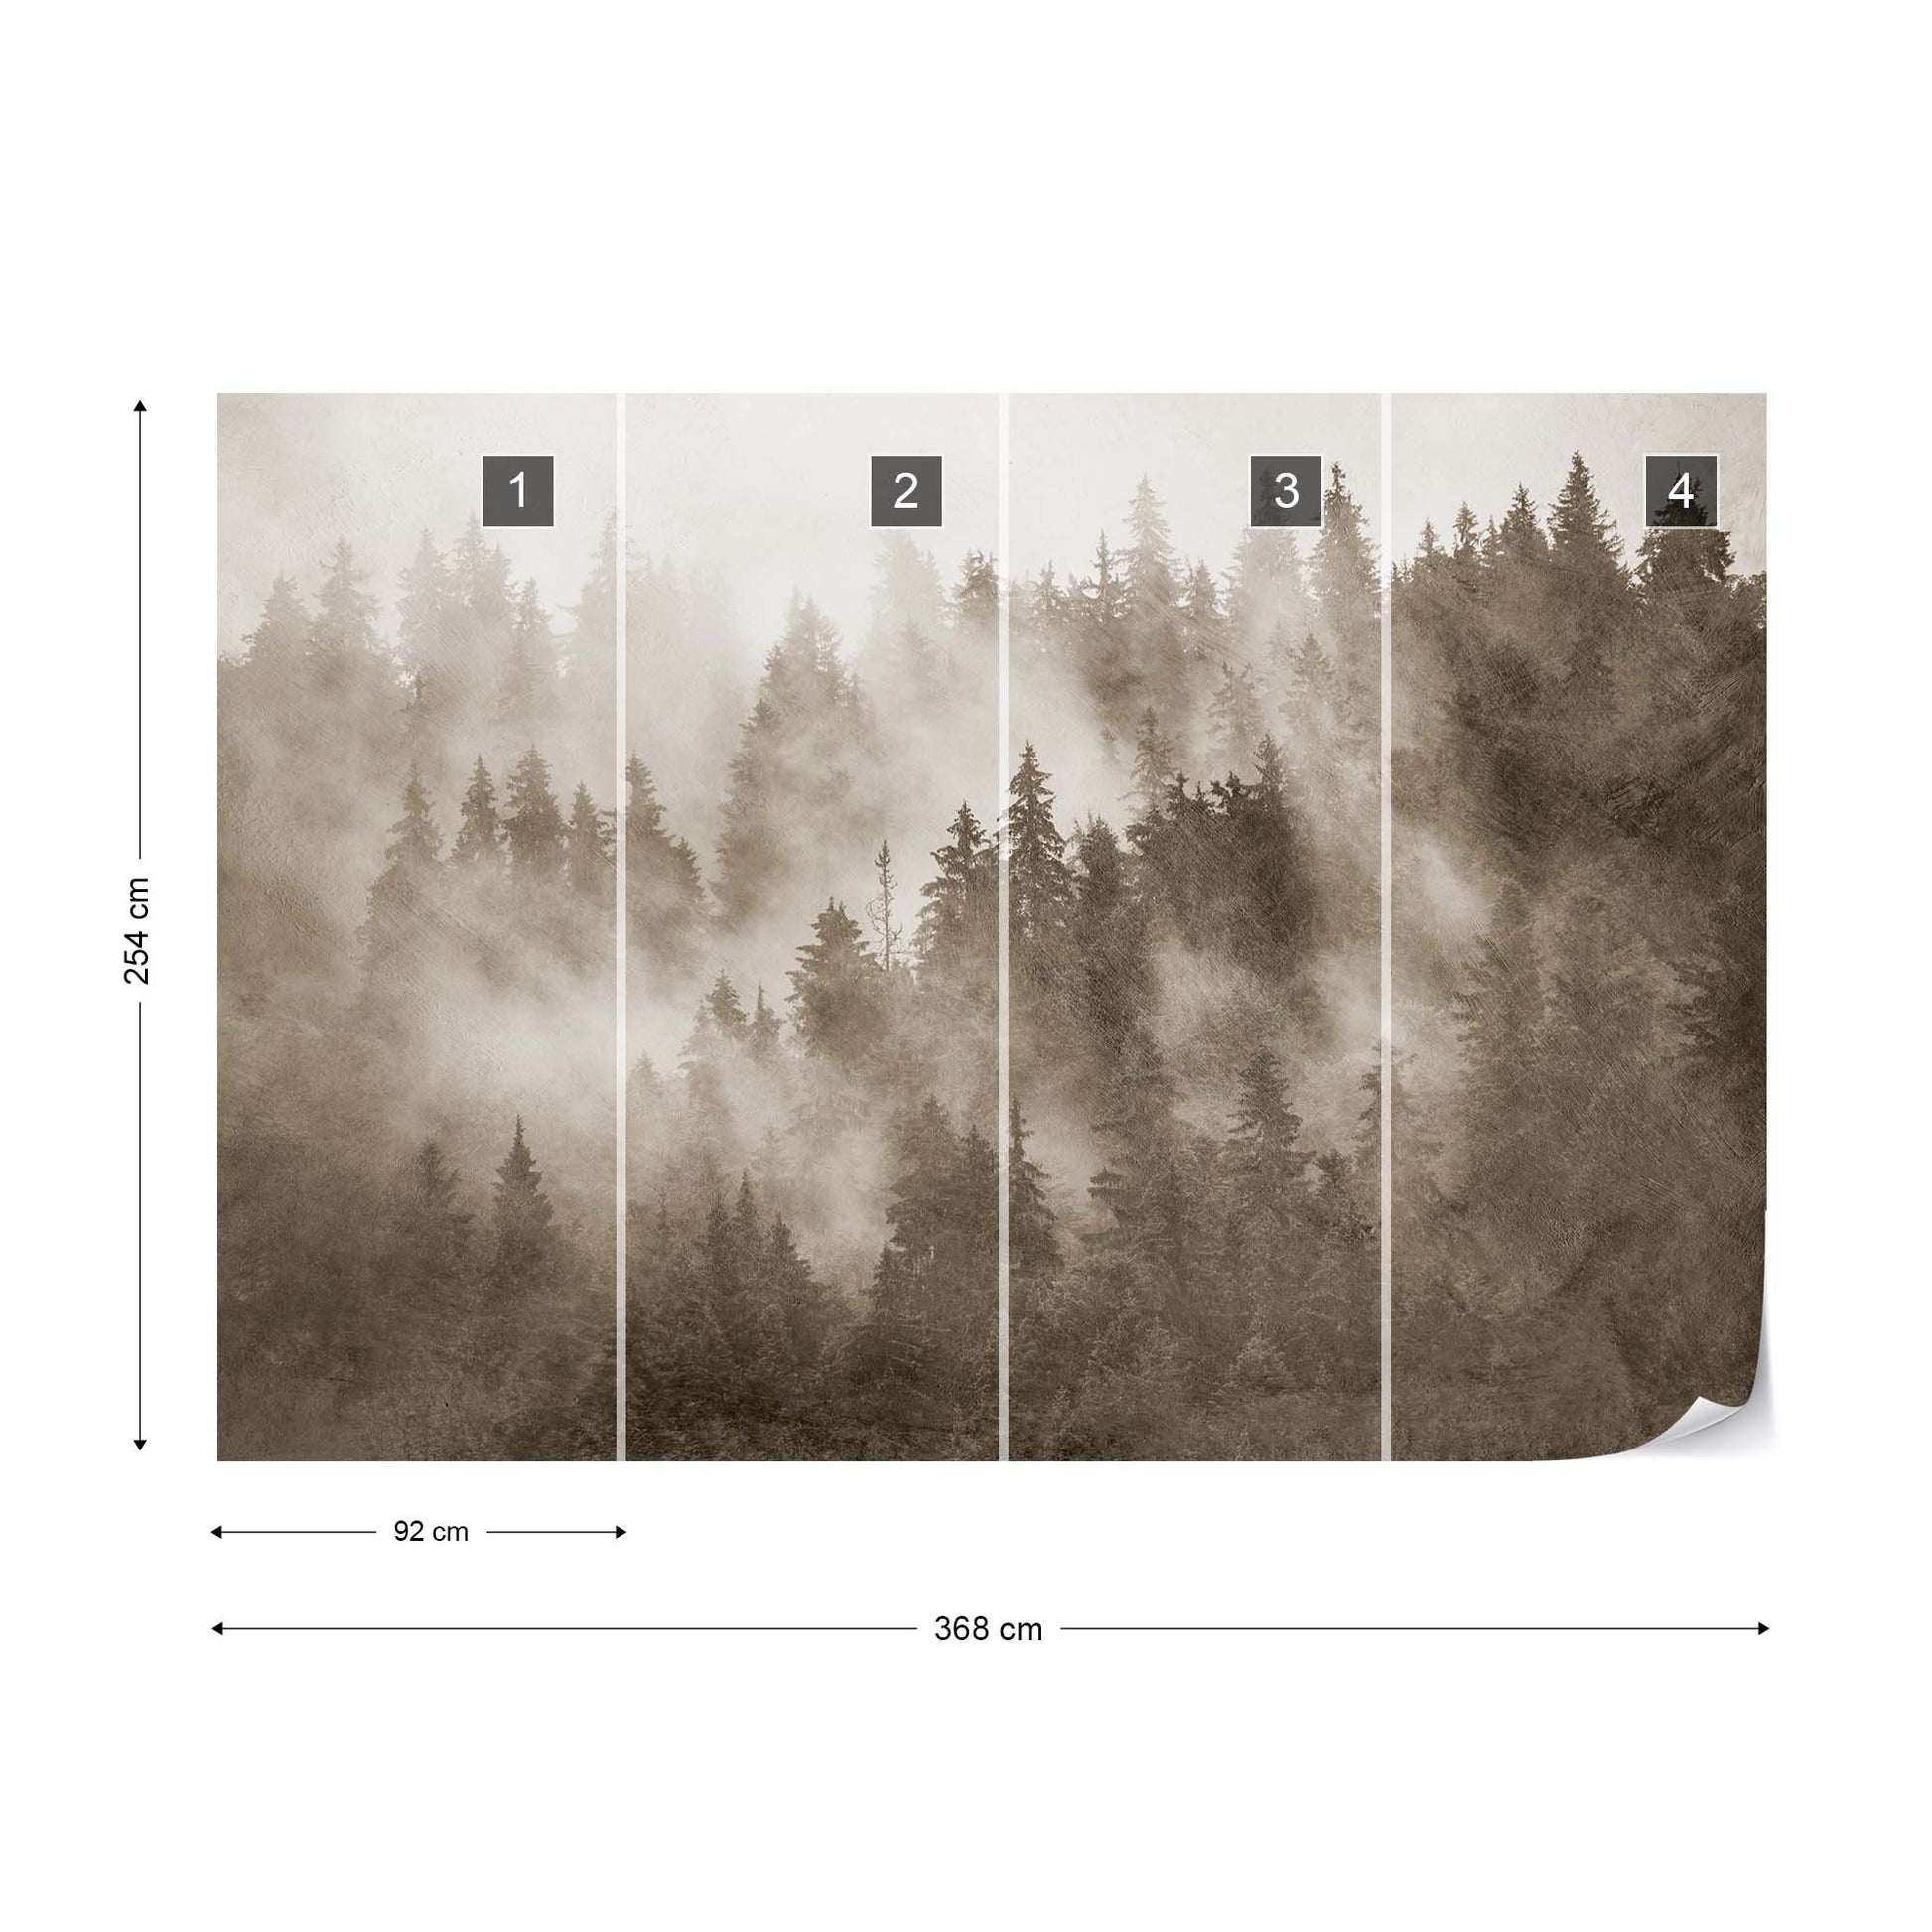 Forest in the Mist Textured in Sepia Wallpaper Waterproof for Rooms Bathroom Kitchen - USTAD HOME